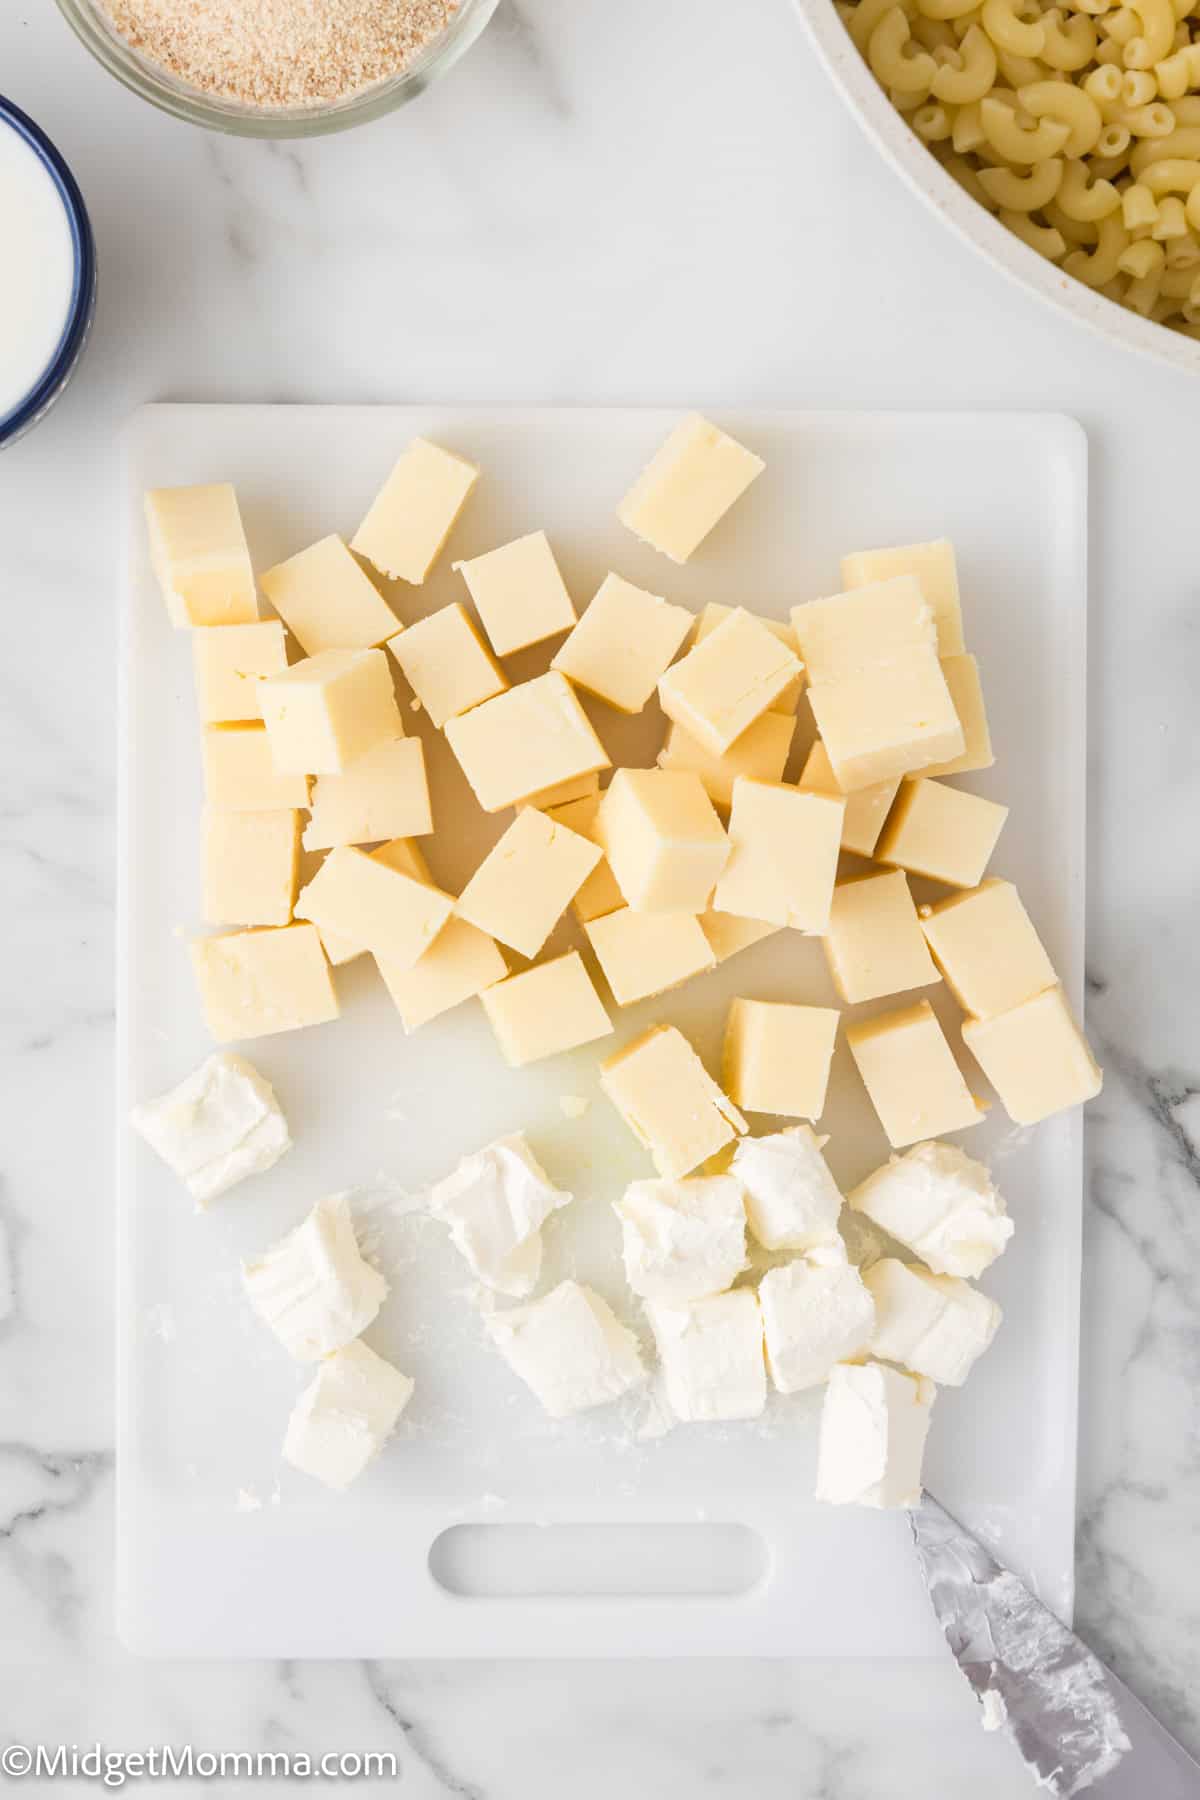 Chopped cubes of yellow cheddar and cream cheese on a white cutting board, with a knife and ingredients like pasta and flour in the background.